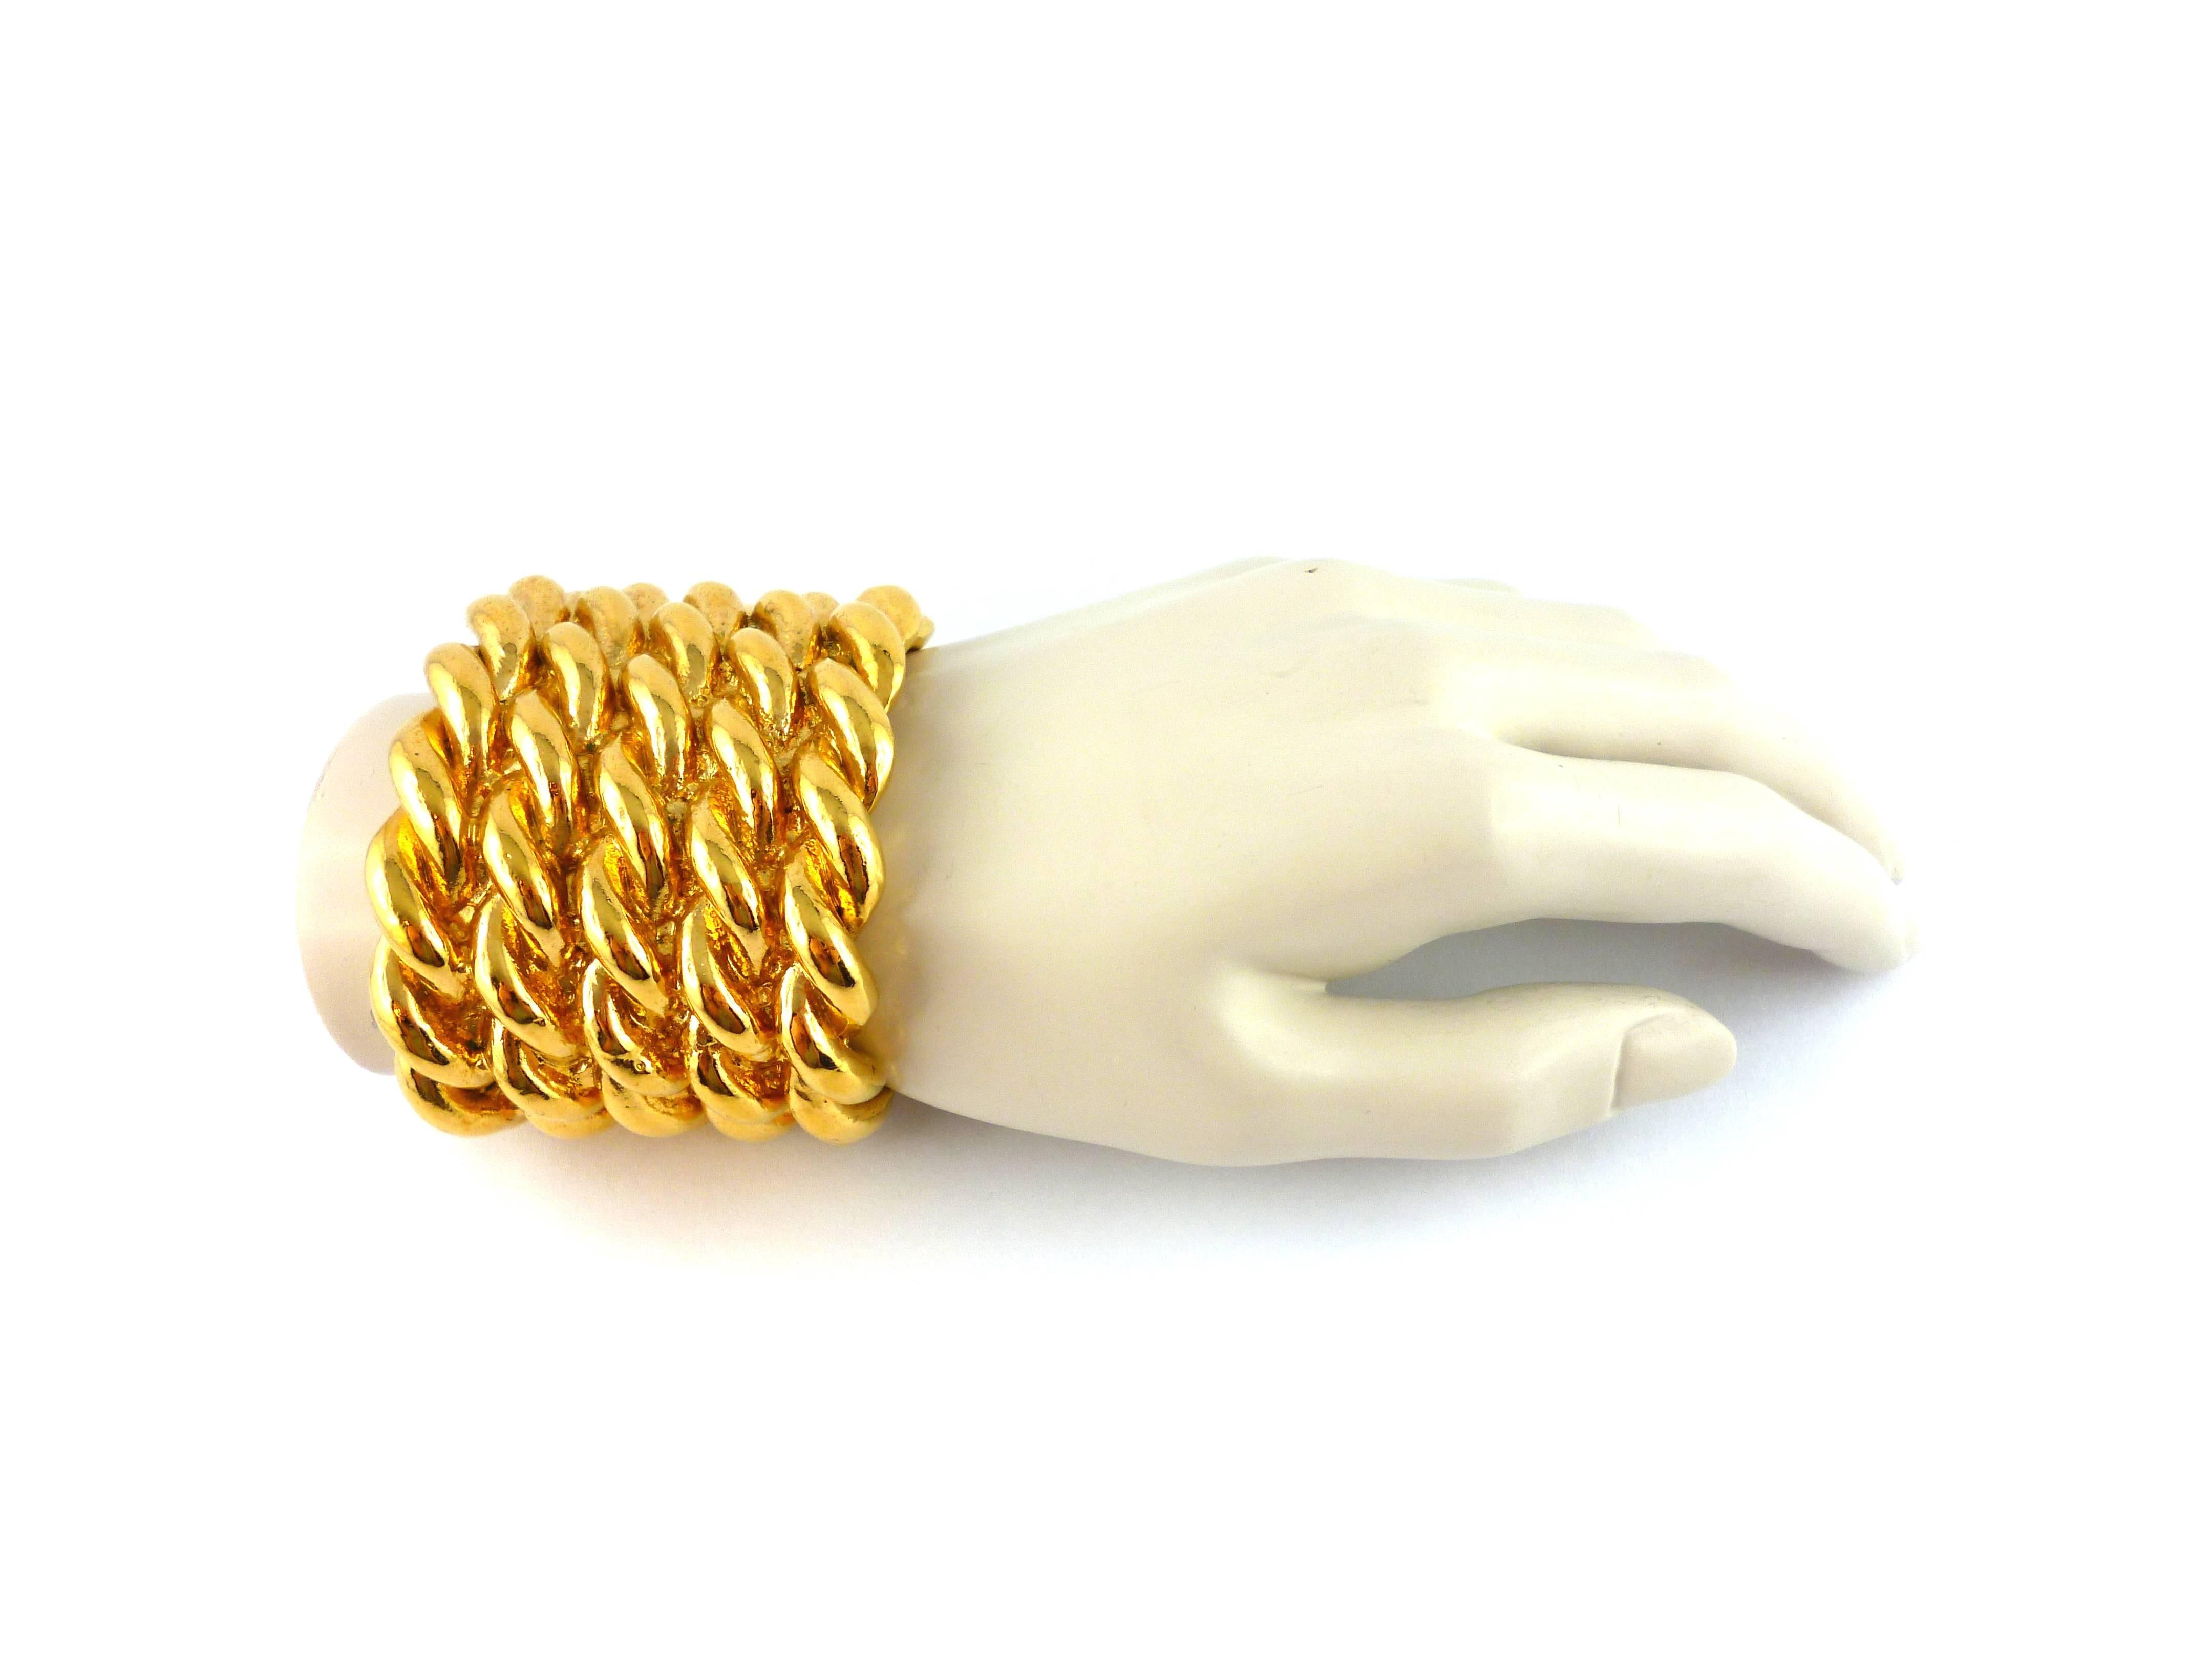 EDOUARD RAMBAUD vintage massive gold toned resin bracelet cuff with a rope-like design.

Embossed EDOUARD RAMBAUD Paris.

Indicative measurements : total width approx. 7.2 cm (2.83 inches) / inside maximum width approx. 6 cm (2.36 inches) /